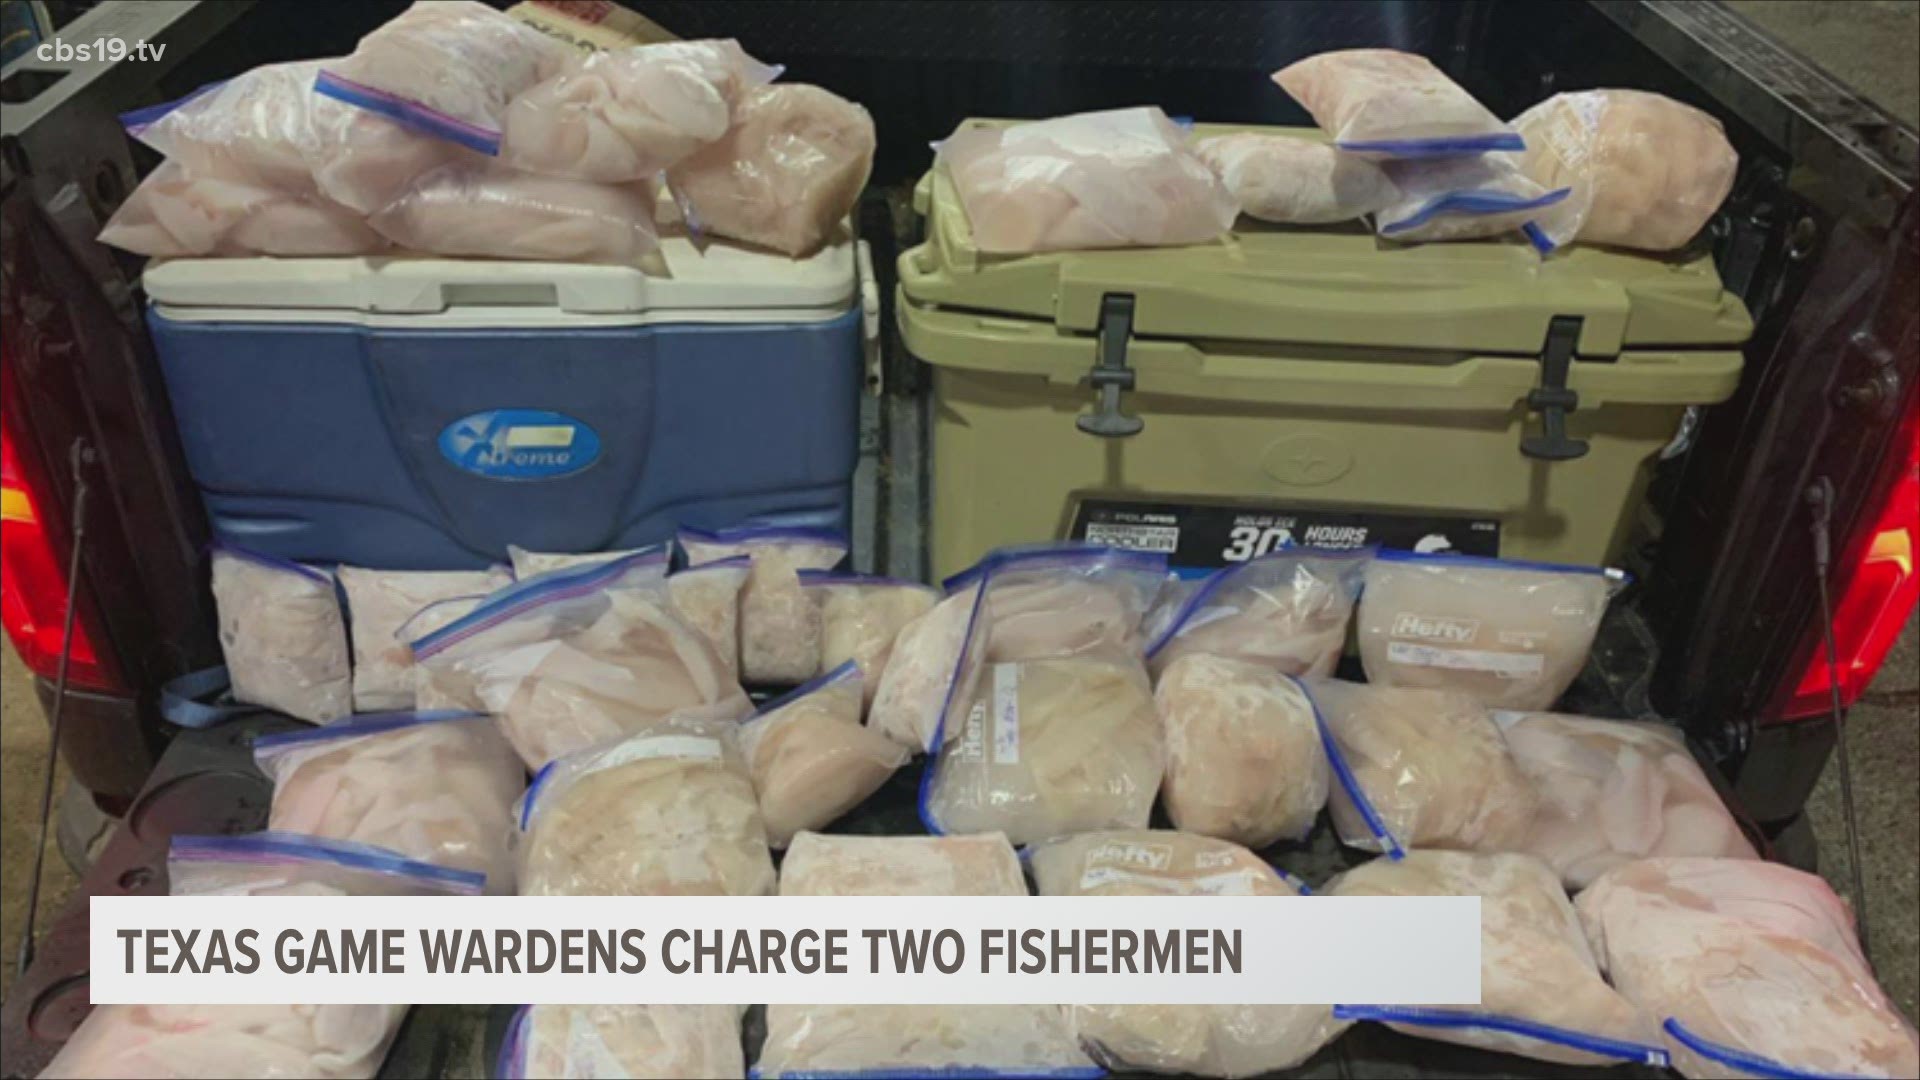 Charges are pending after Texas Game Wardens in Upshur County discovered two fishermen with crappie over the legal limit.